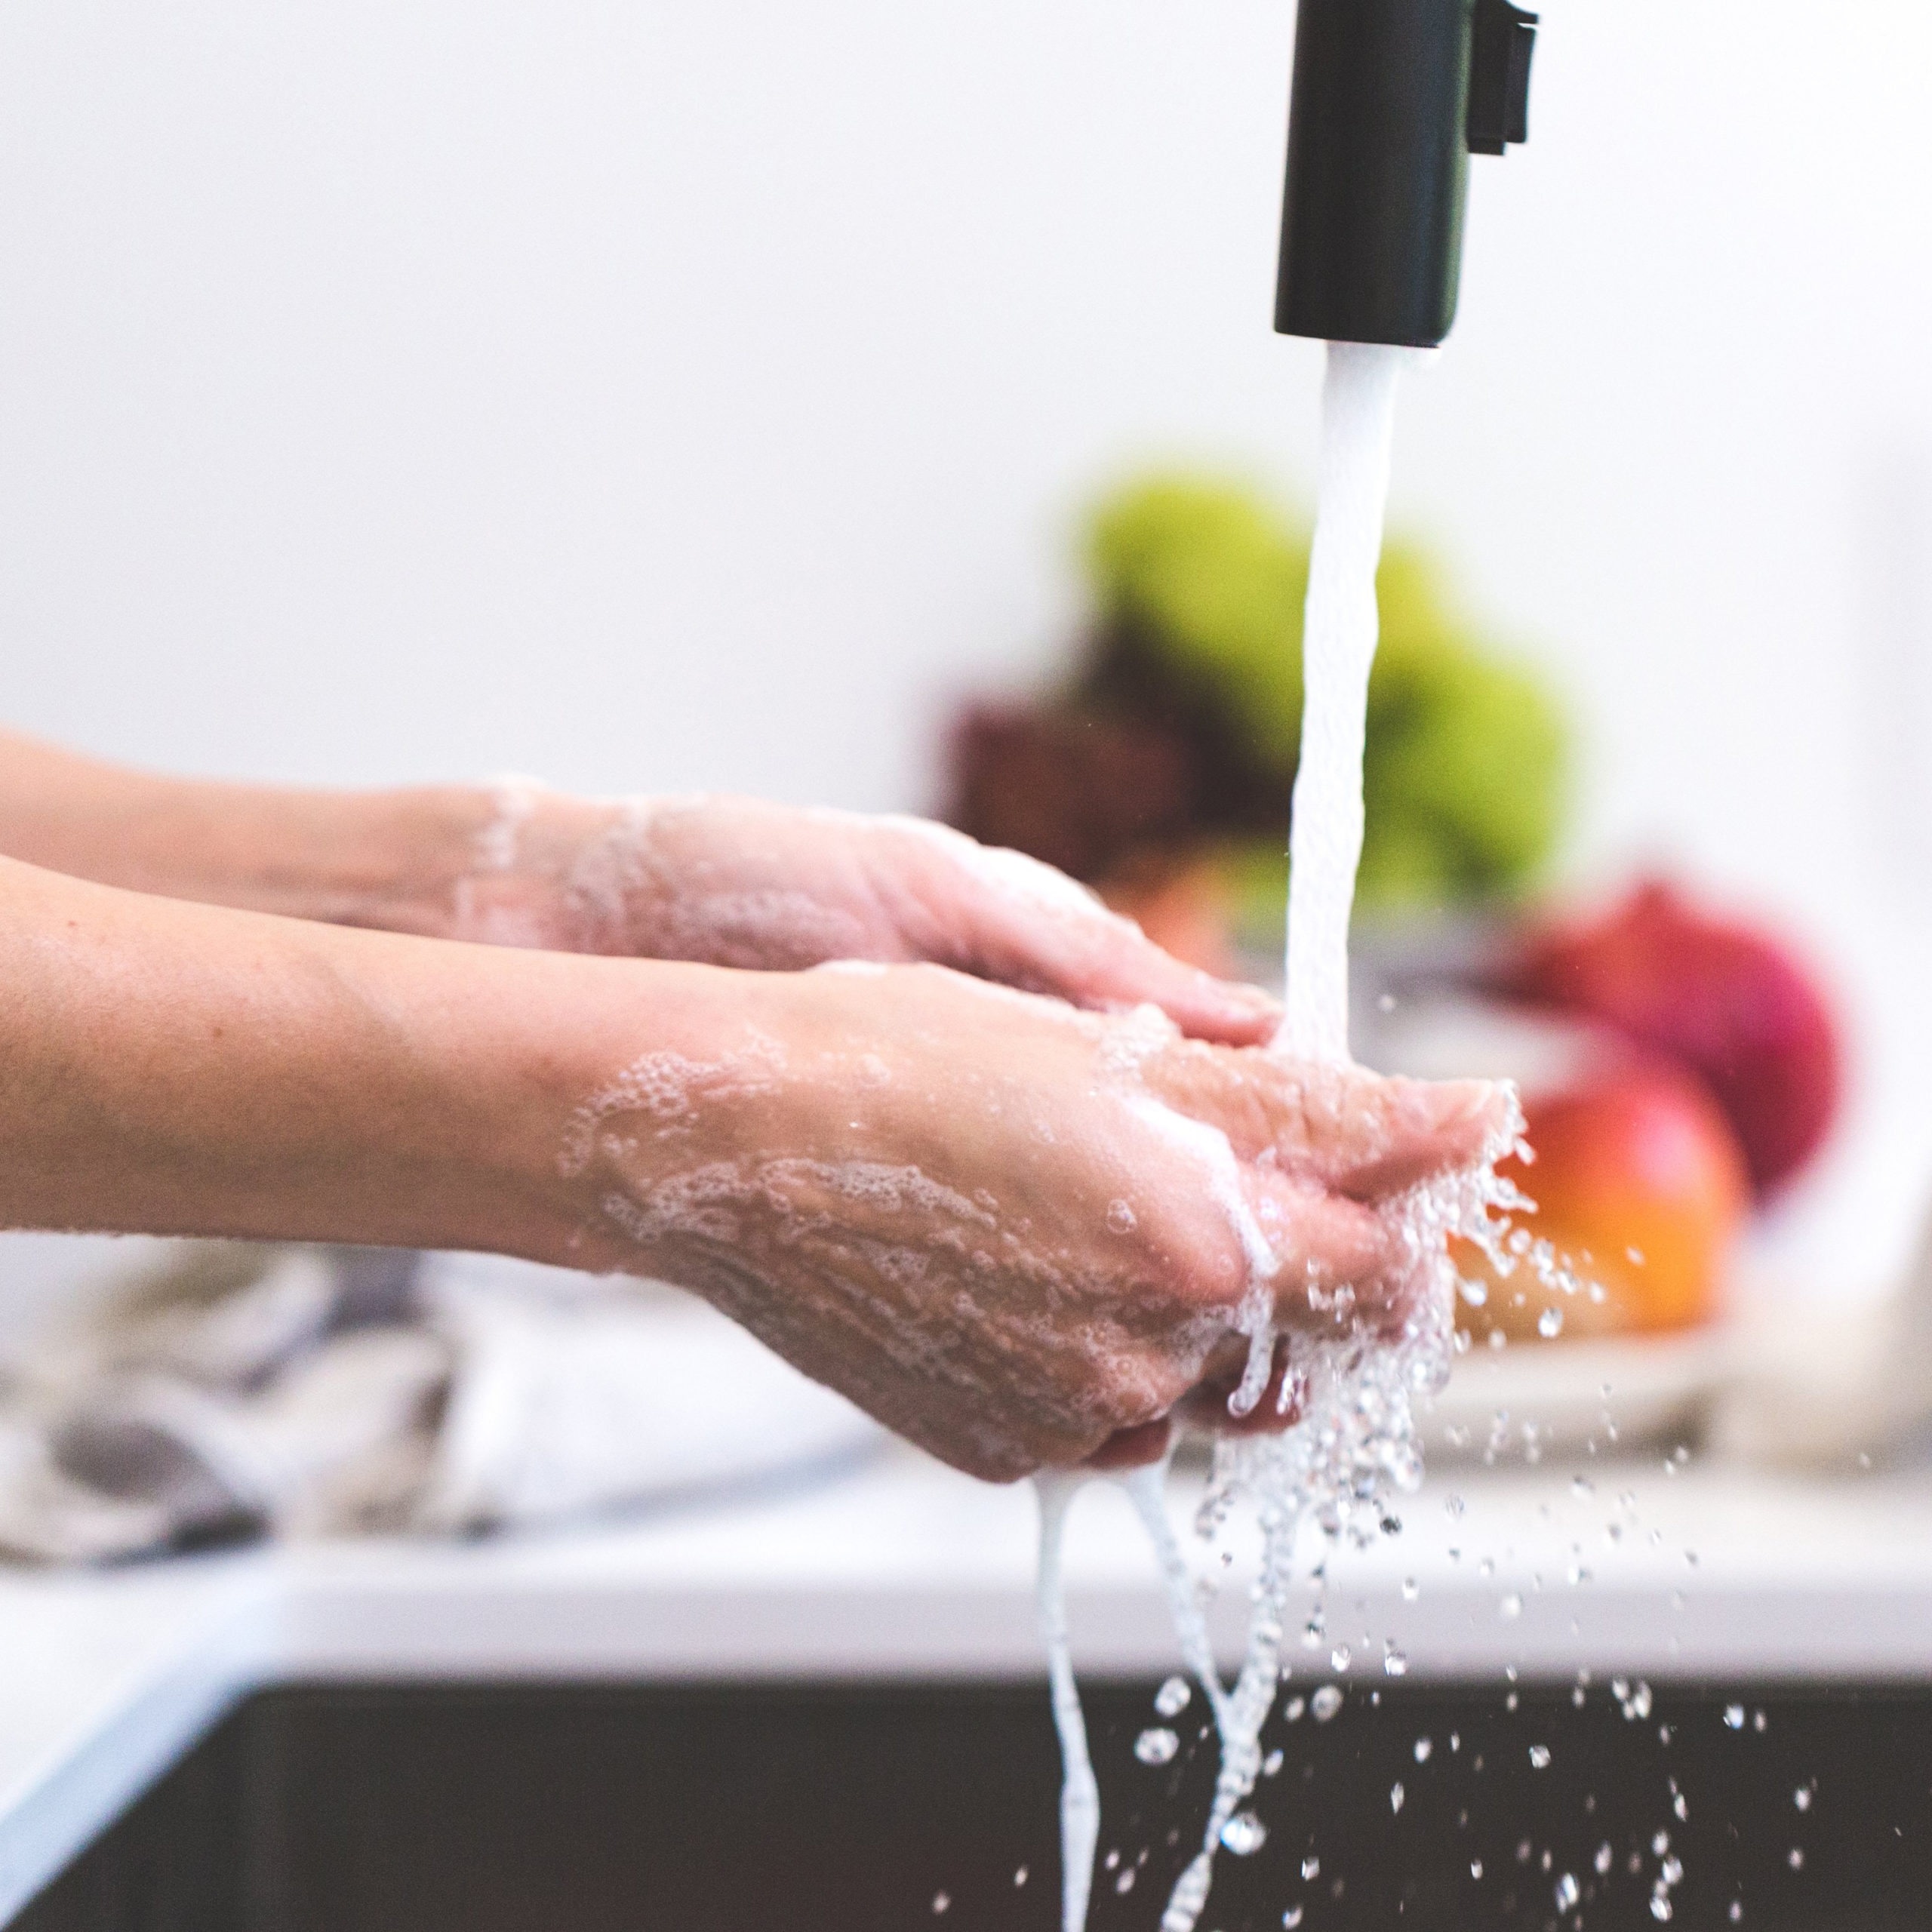 Wash Hands Eat Healthy scaled - Emergency Management Offers Tips for Cold and Flu Prevention